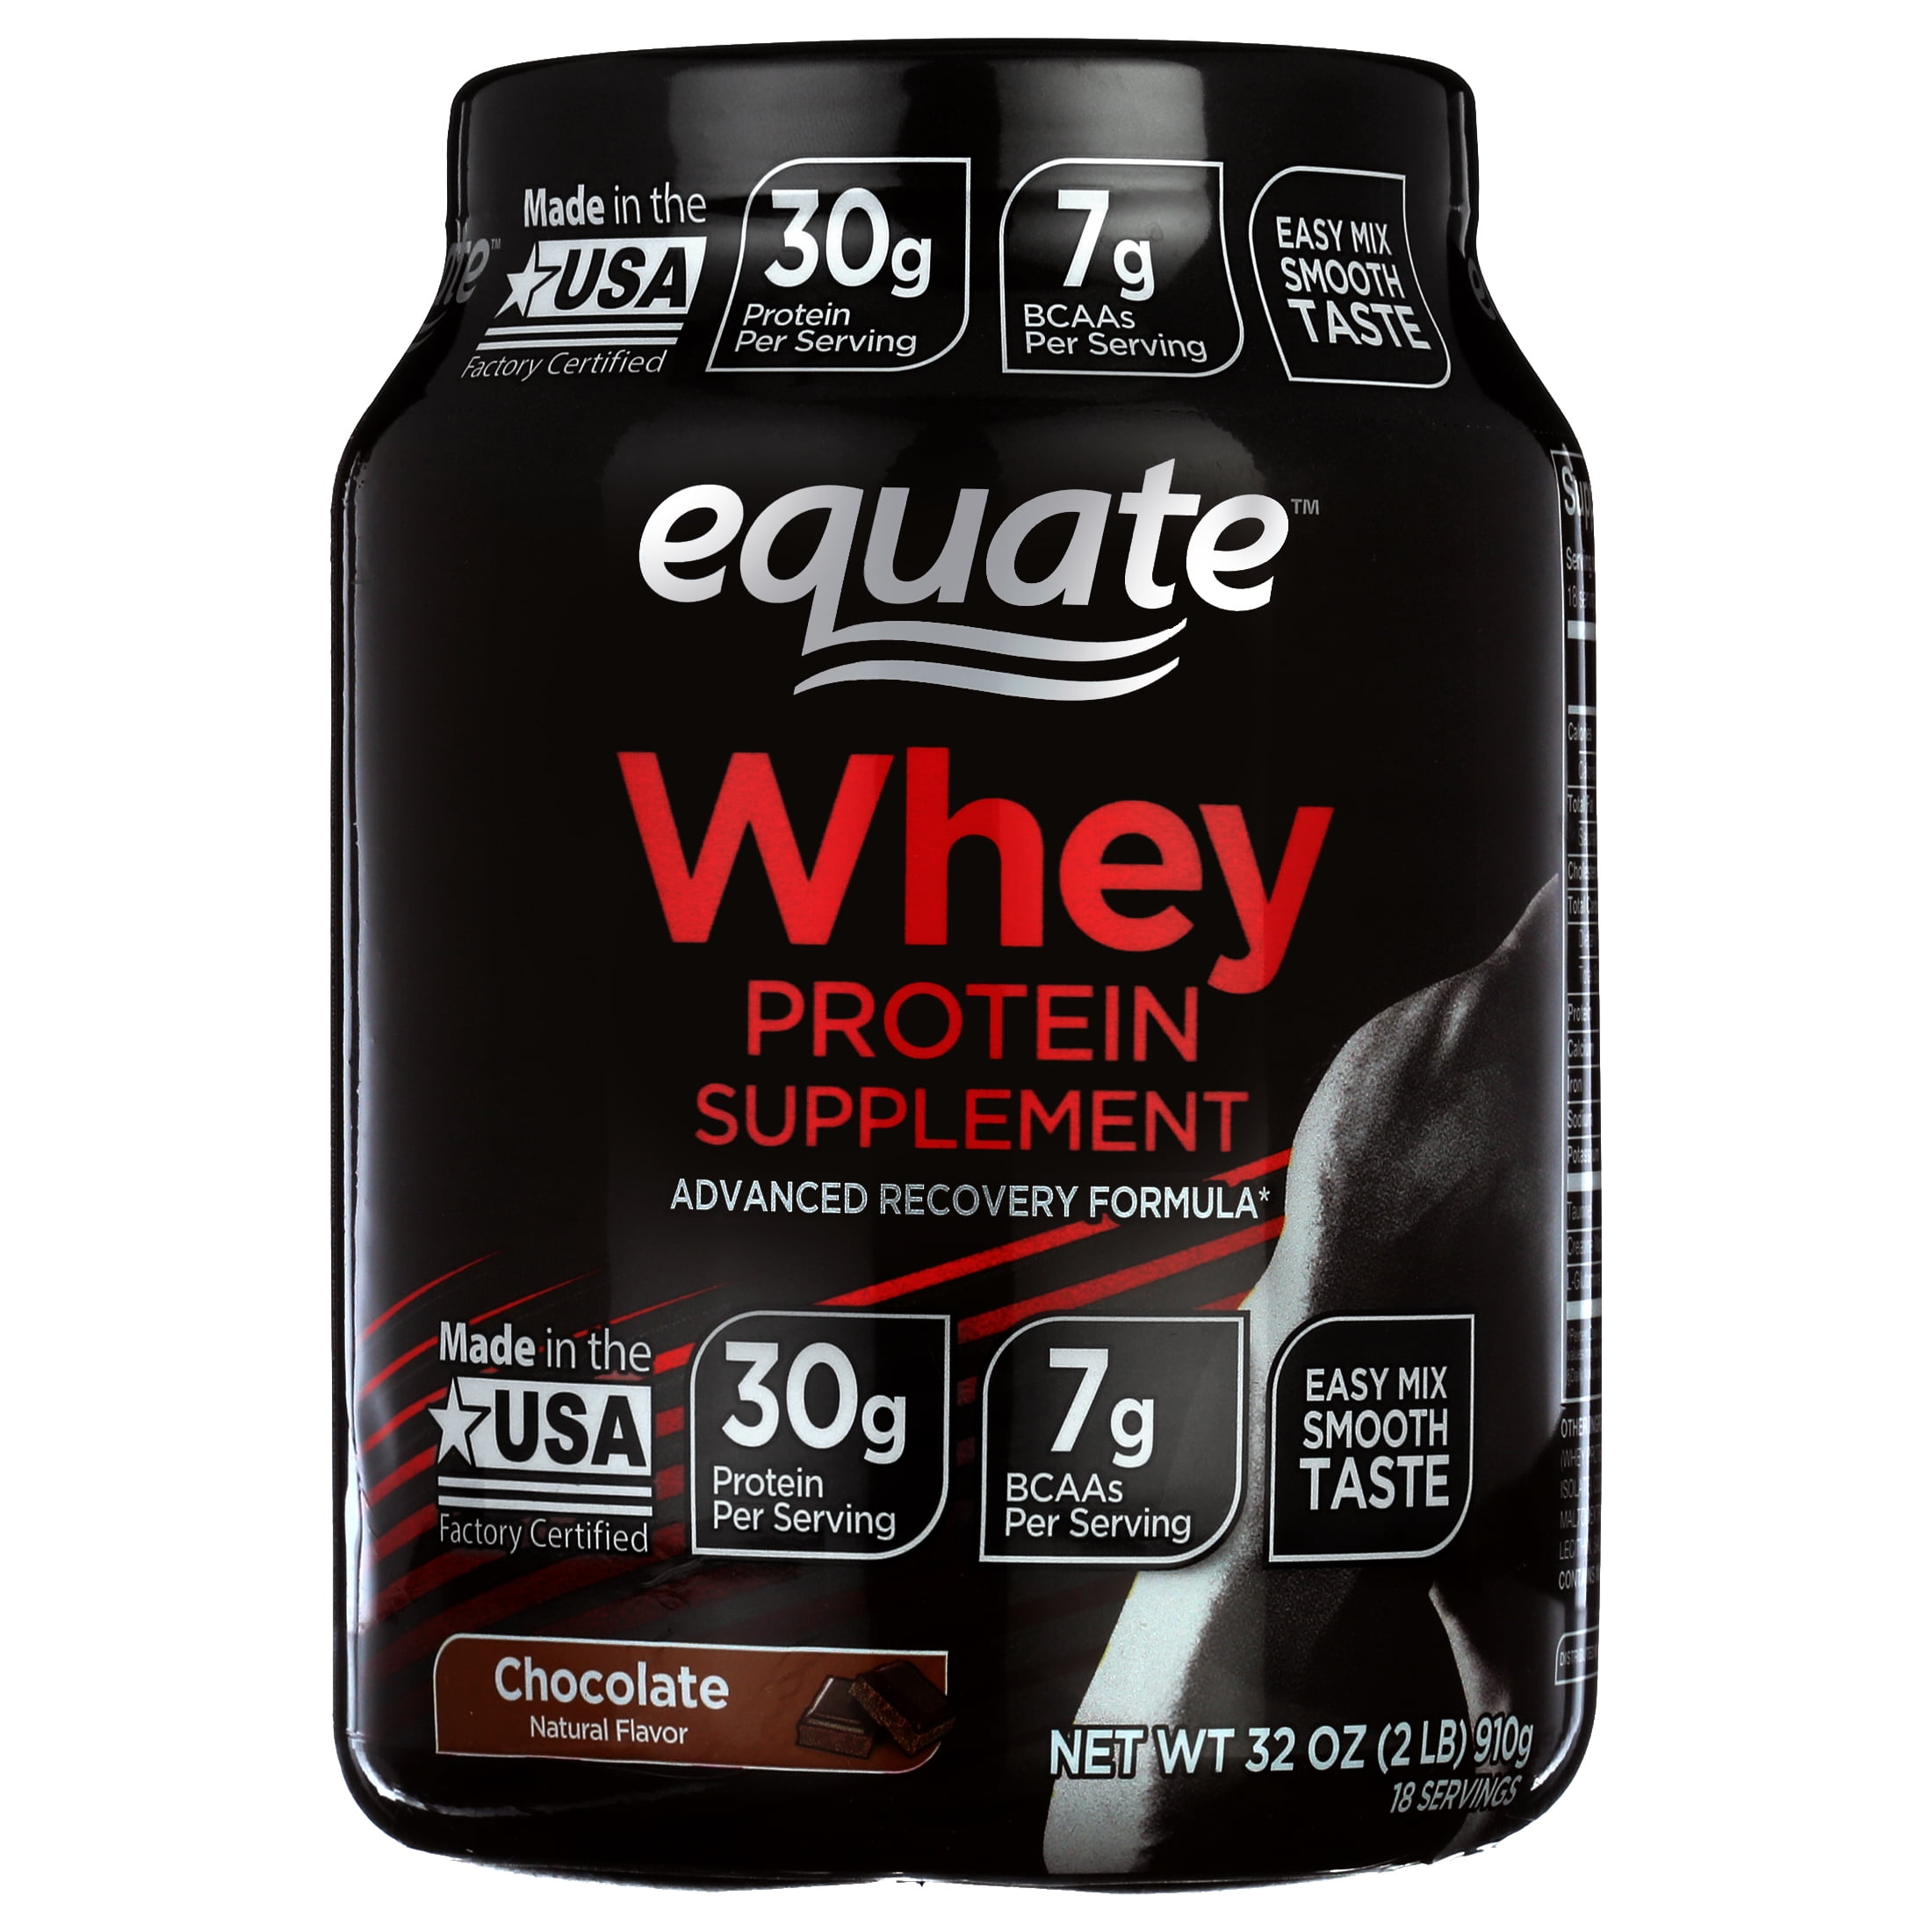 Equate Whey Protein Supplement, Rich Chocolate, 30g, 32oz